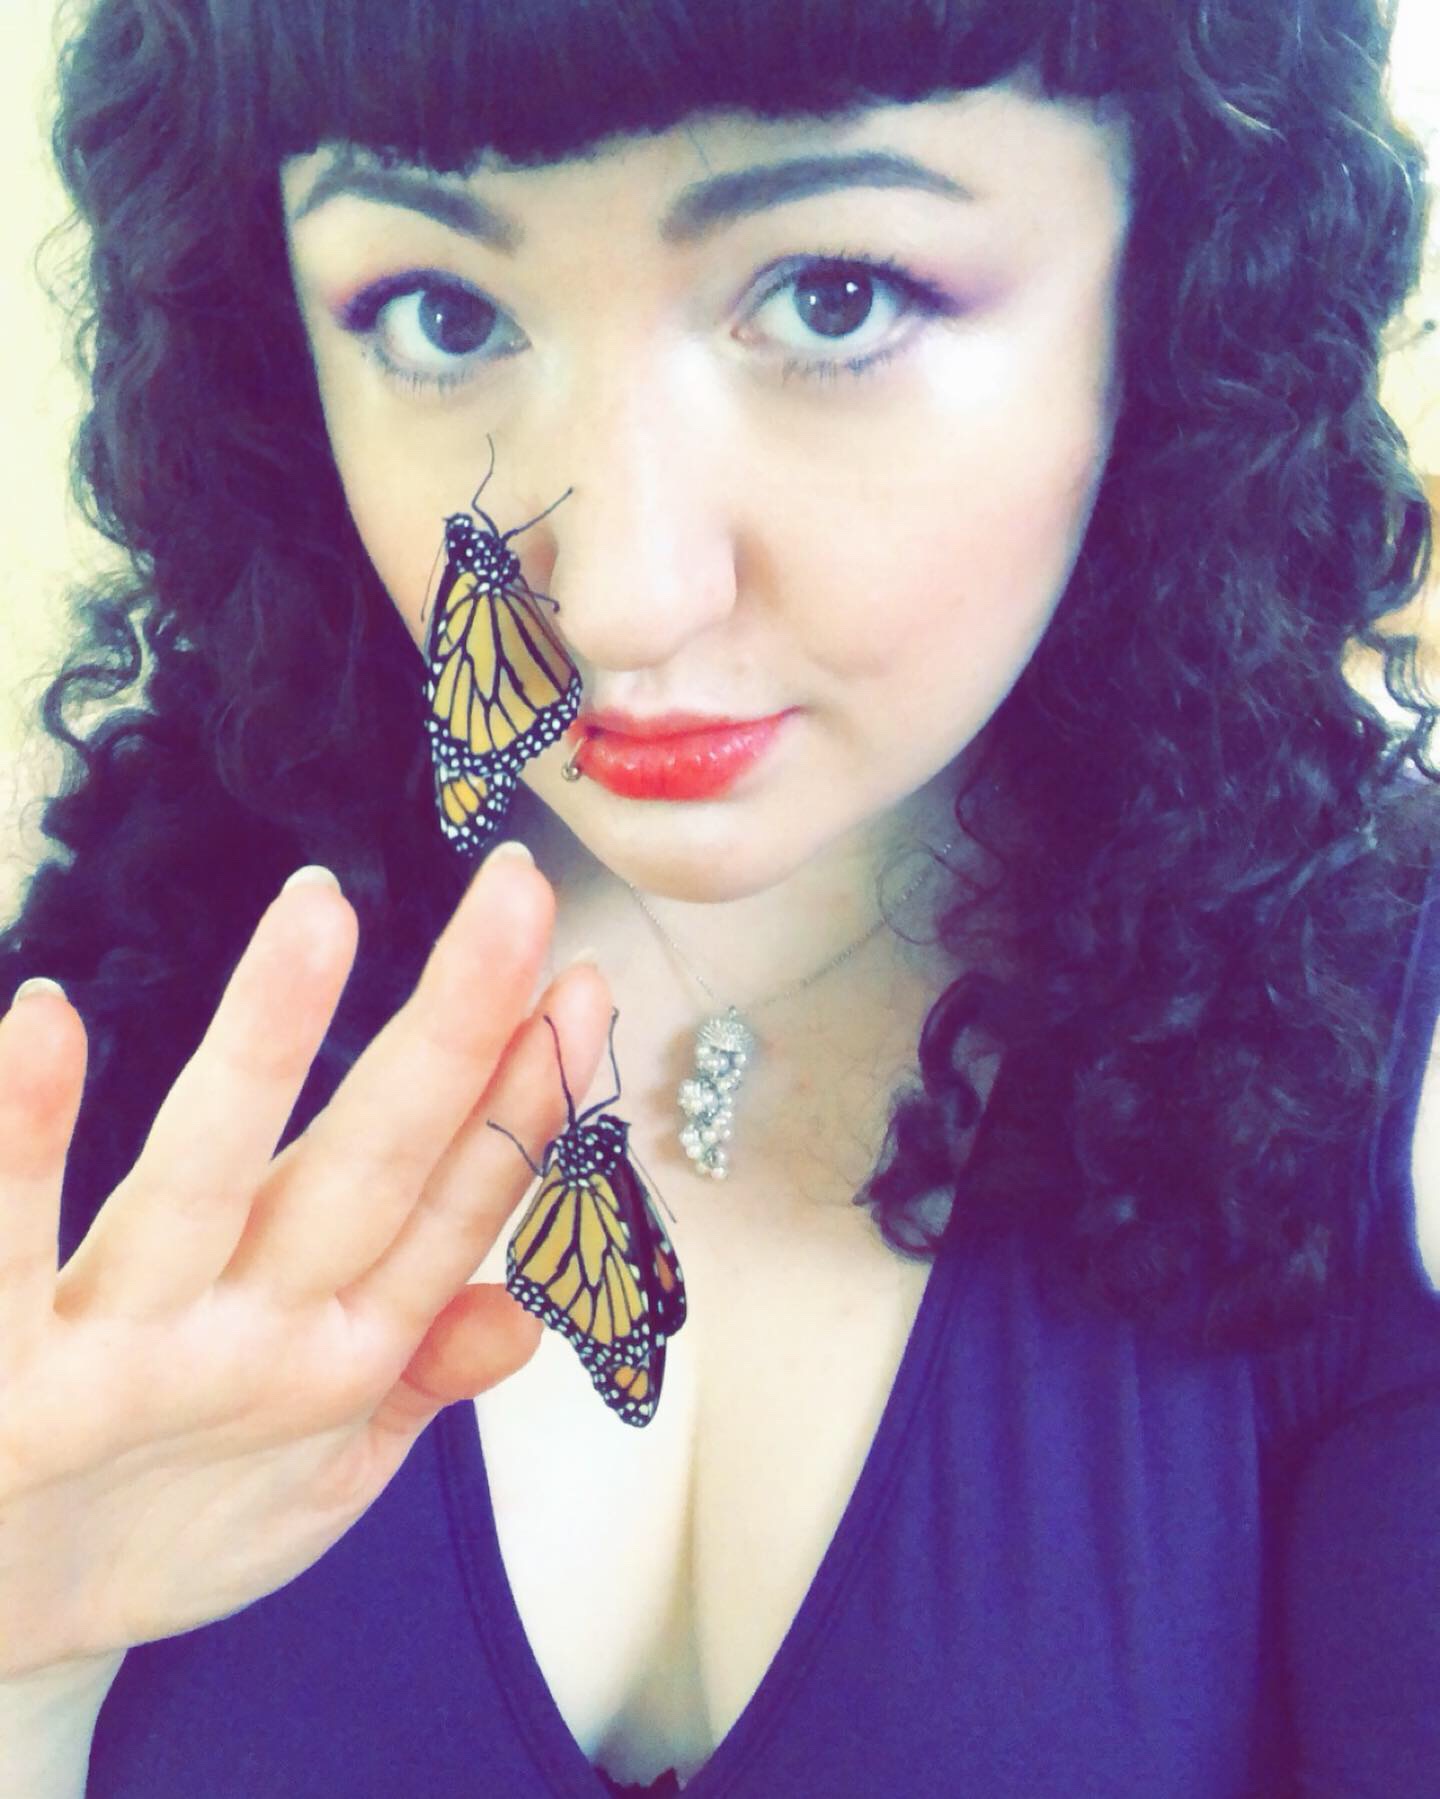 self portrait of the site creator. Pale woman with dark curly brown hair, holding monach butterflies